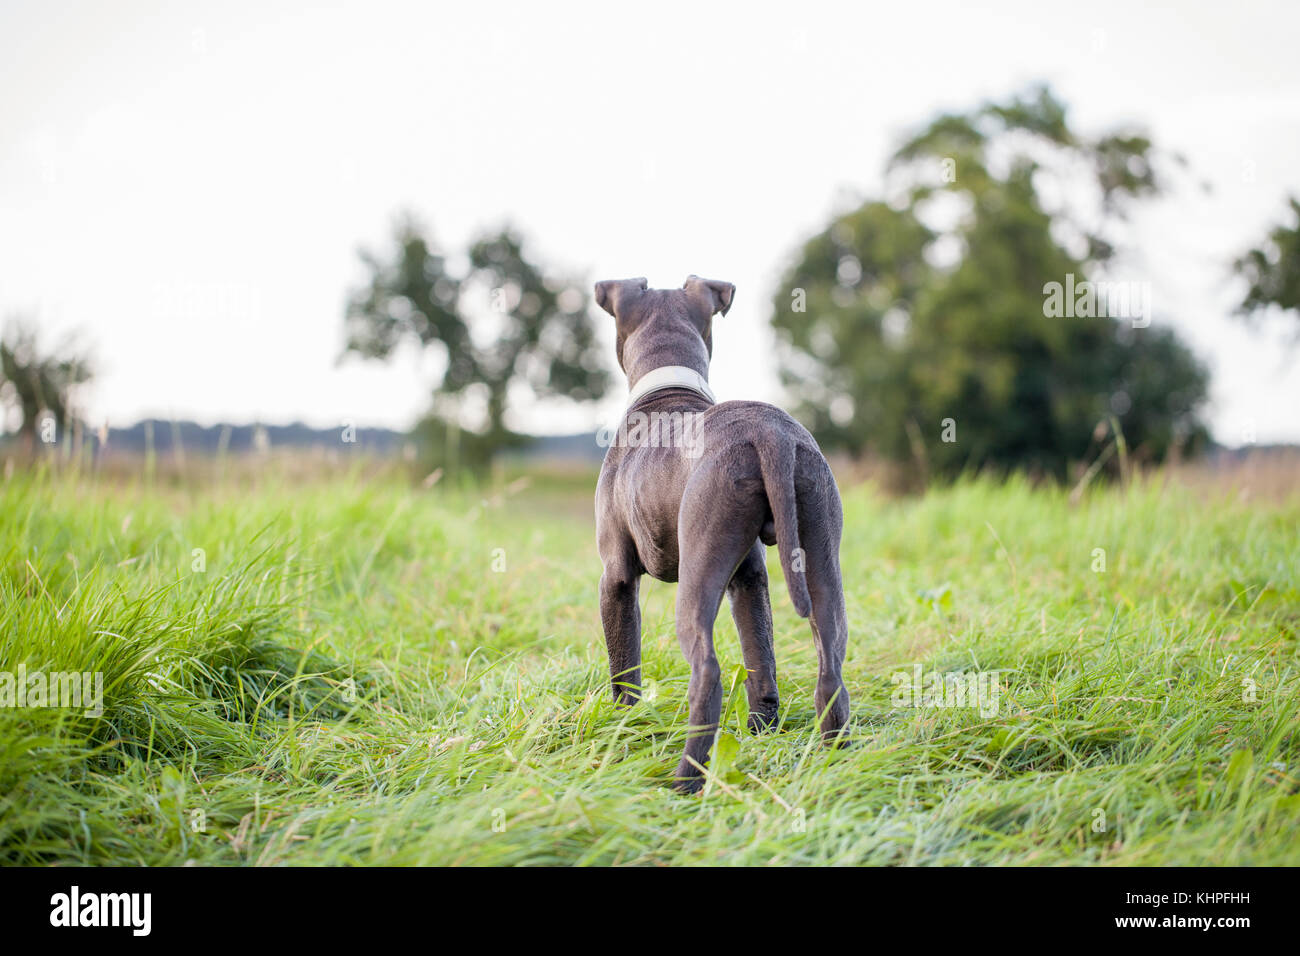 pitbull dog with blue collar on grass background Stock Photo